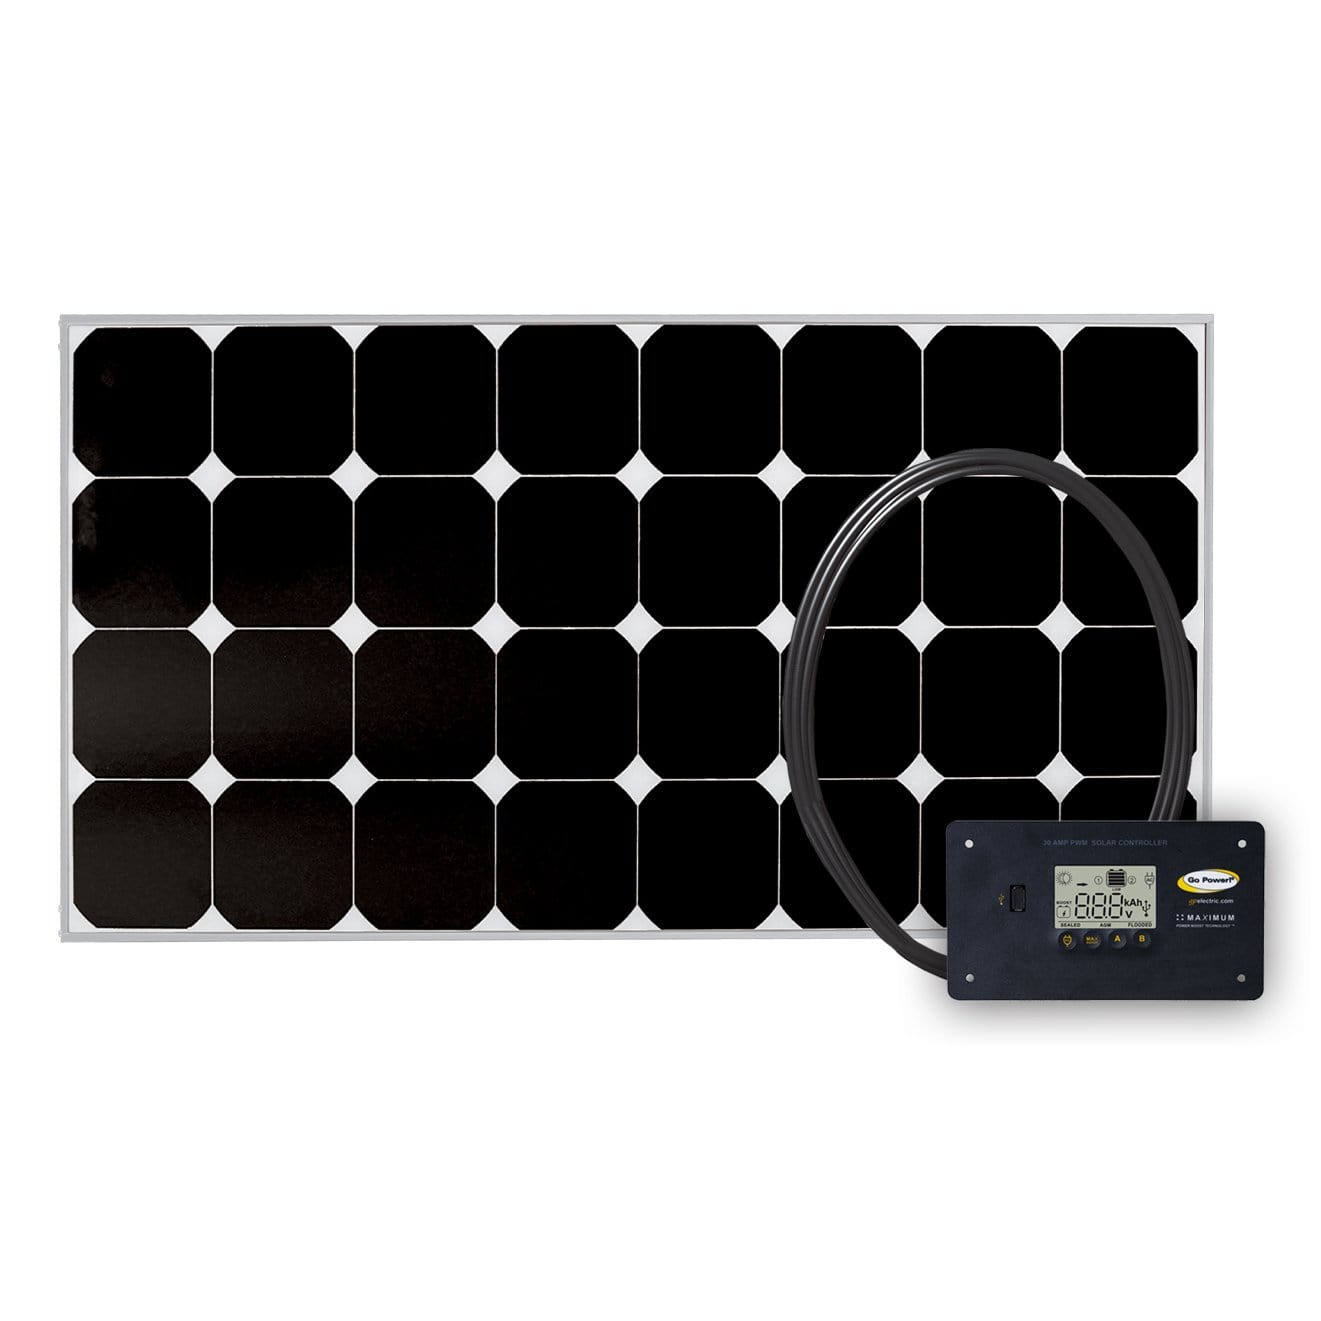 Go Power Retreat 100 Watt 5.45 Amps Solar Charging Kit With 30 Amp Digital Charge Controller